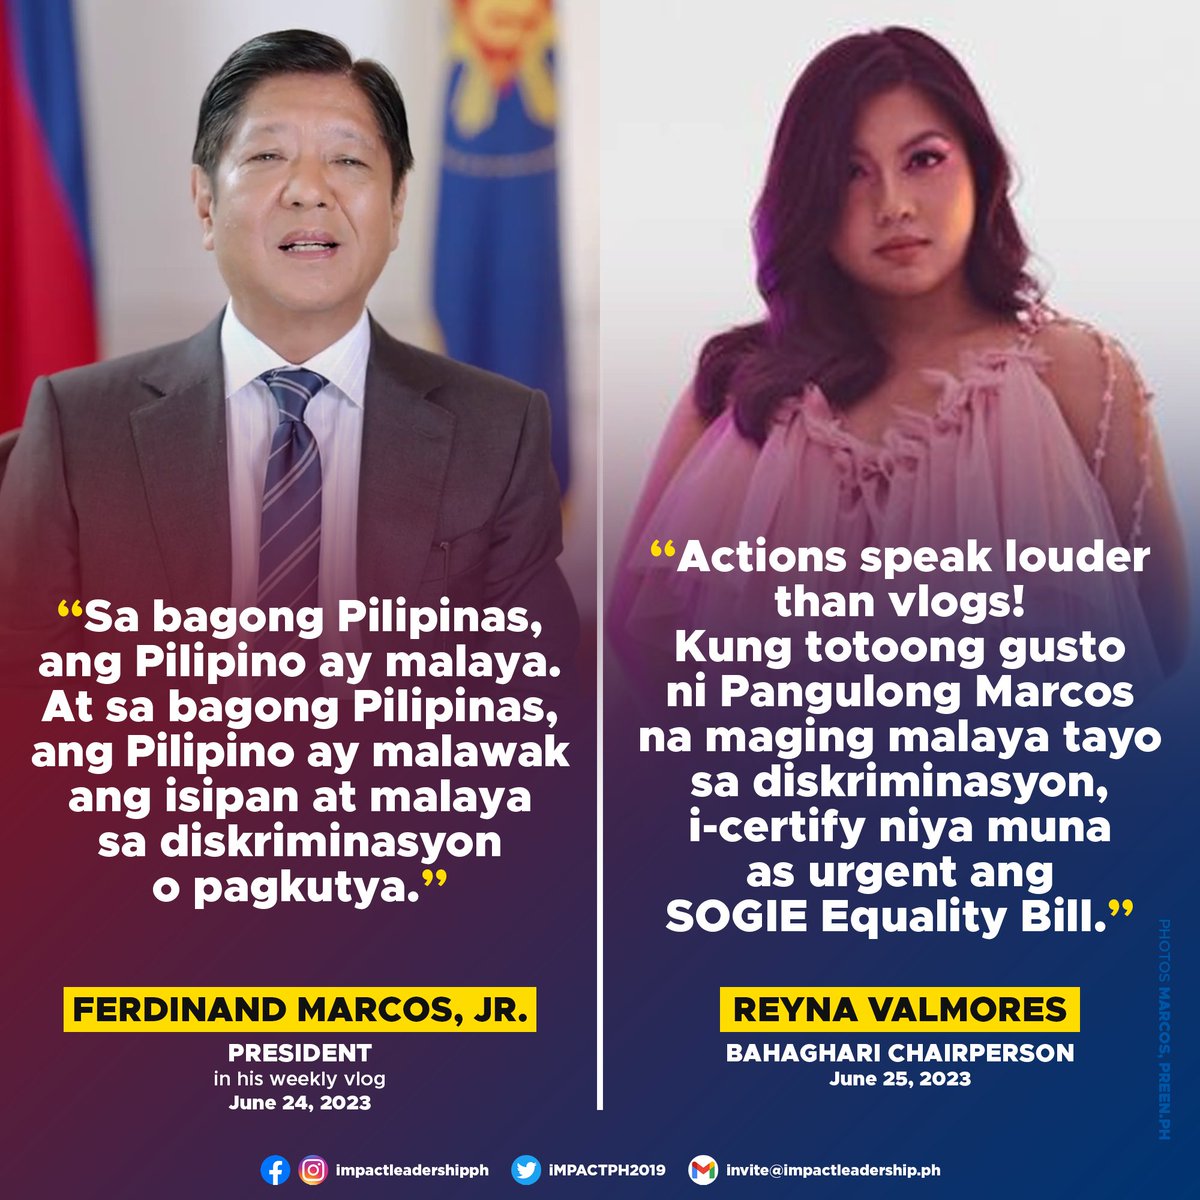 'ACTIONS SPEAK LOUDER THAN VLOGS!' ✊🏳️‍🌈

Bahaghari Chairperson Reyna Valmores slams Ferdinand Marcos, Jr.'s 'motherhood' Pride statement. #SOGIEEqualityNow

m.facebook.com/story.php?stor…